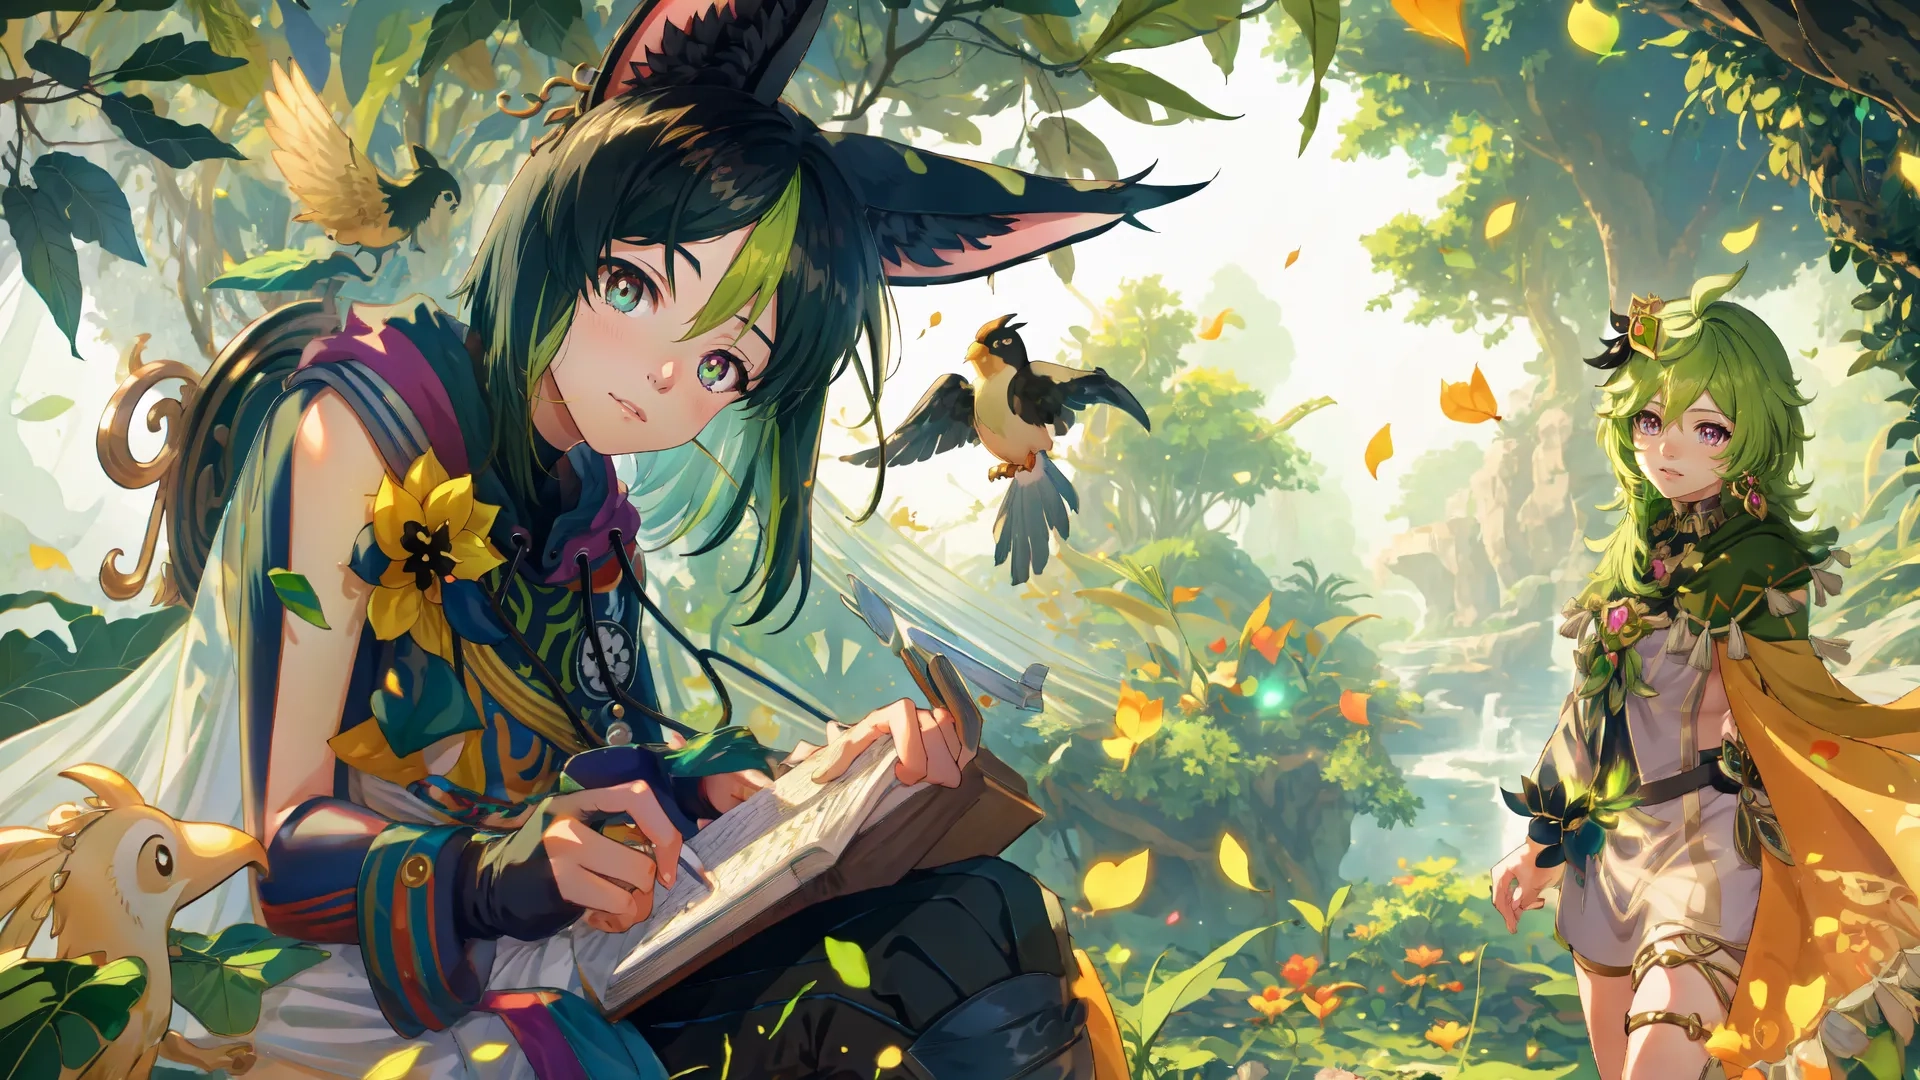 two anime girls reading some books sitting under trees with autumn leaves falling in the background, both holding their respective books and looking at something
